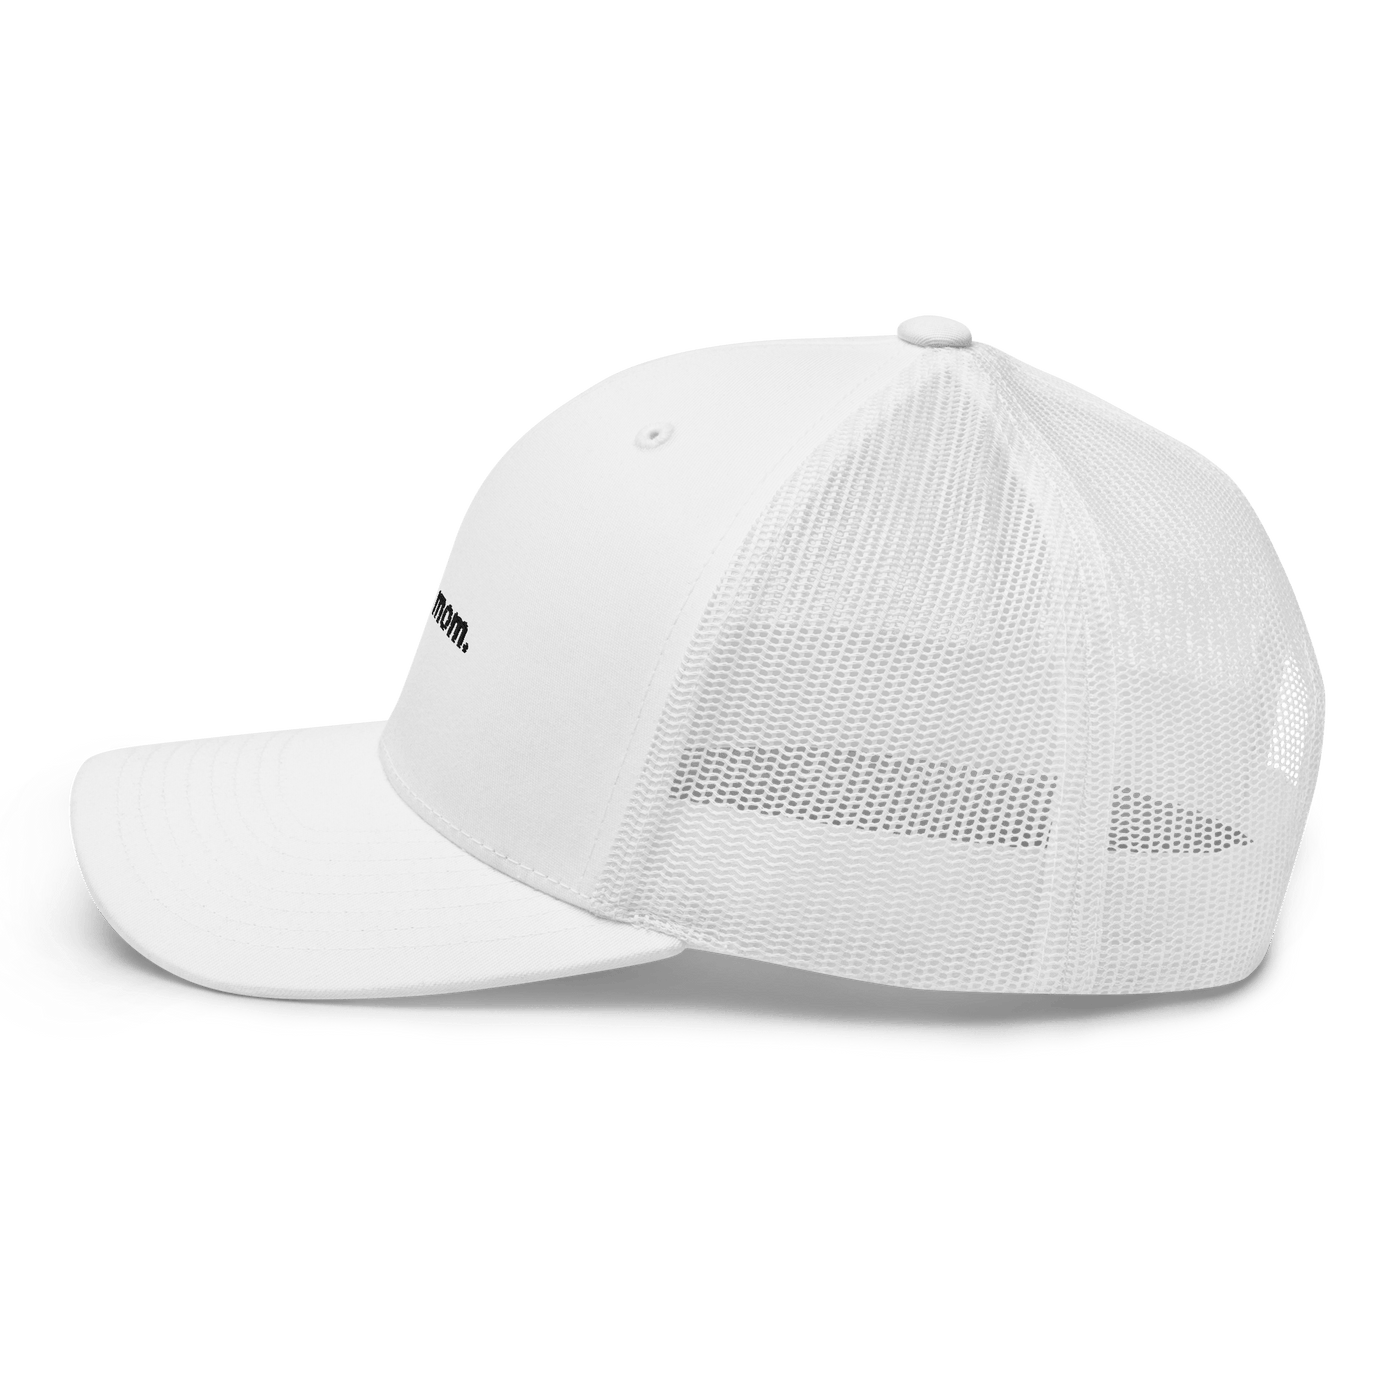 Tired Mom Trucker Cap - White - - Just Another Cap Store